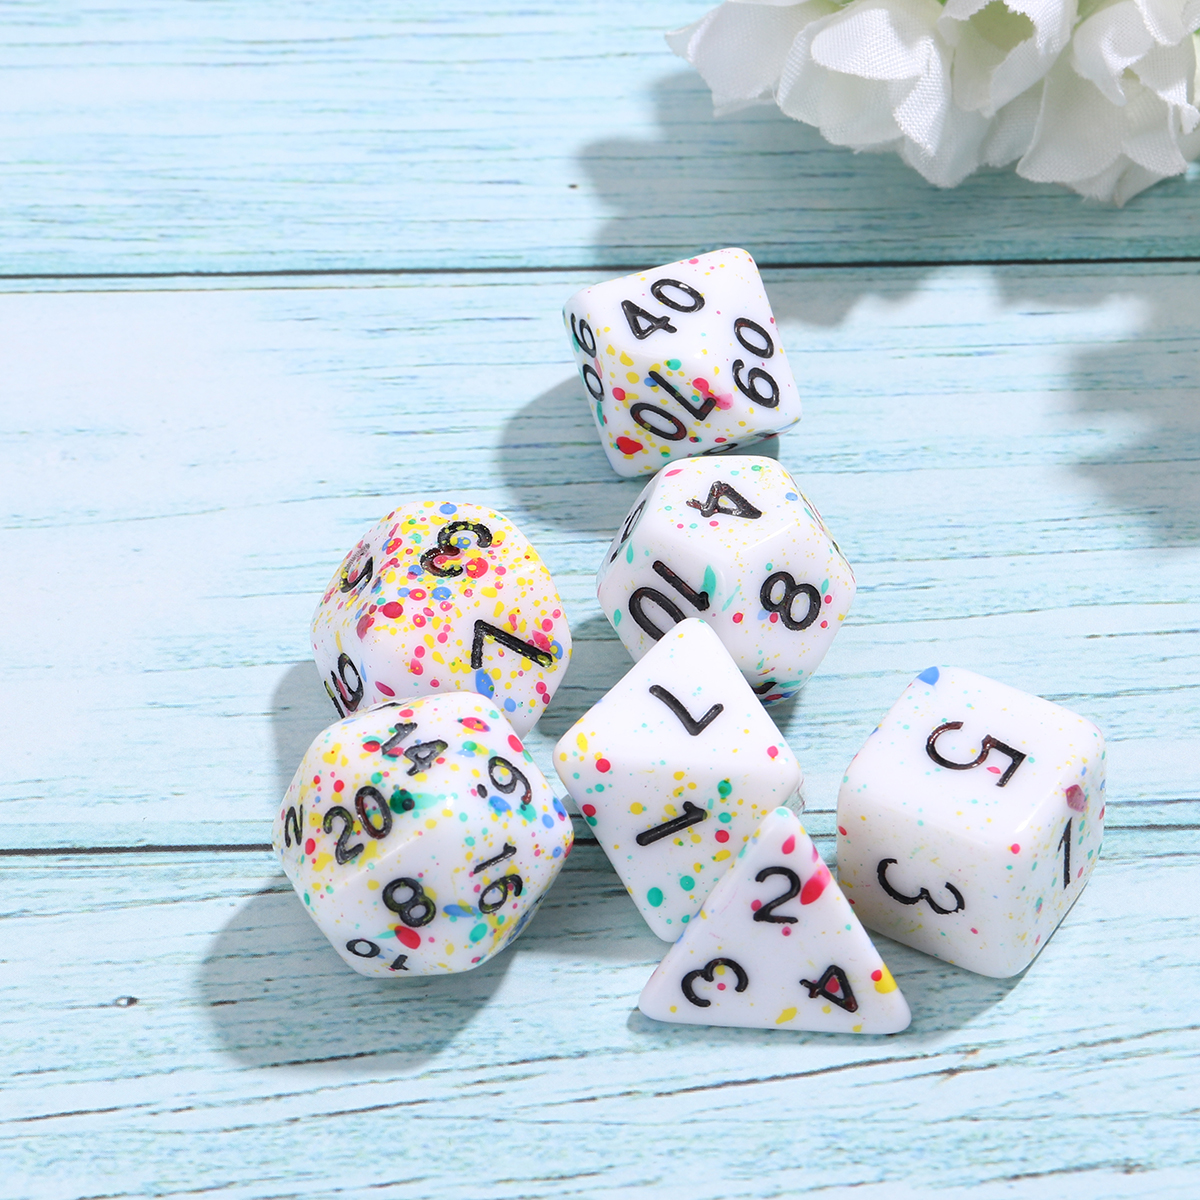 7Pcs-Acrylic-Polyhedral-Dice-Set-Colorful-Board-Game-Multisided-Dices-Gadget-1690588-3